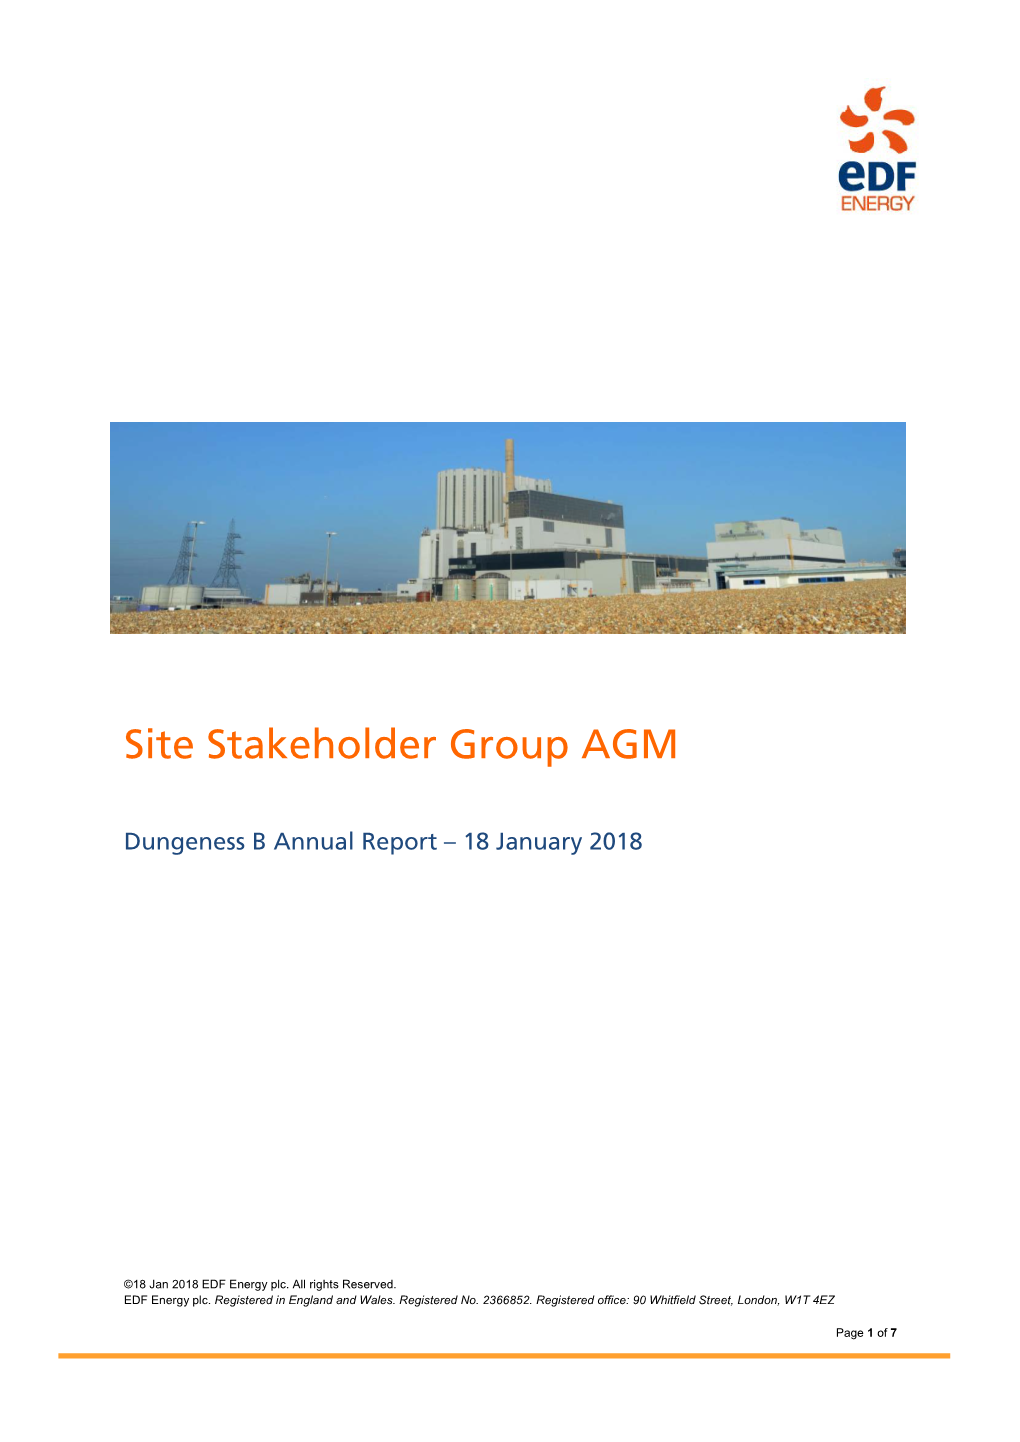 Dungeness B SSG AGM Report